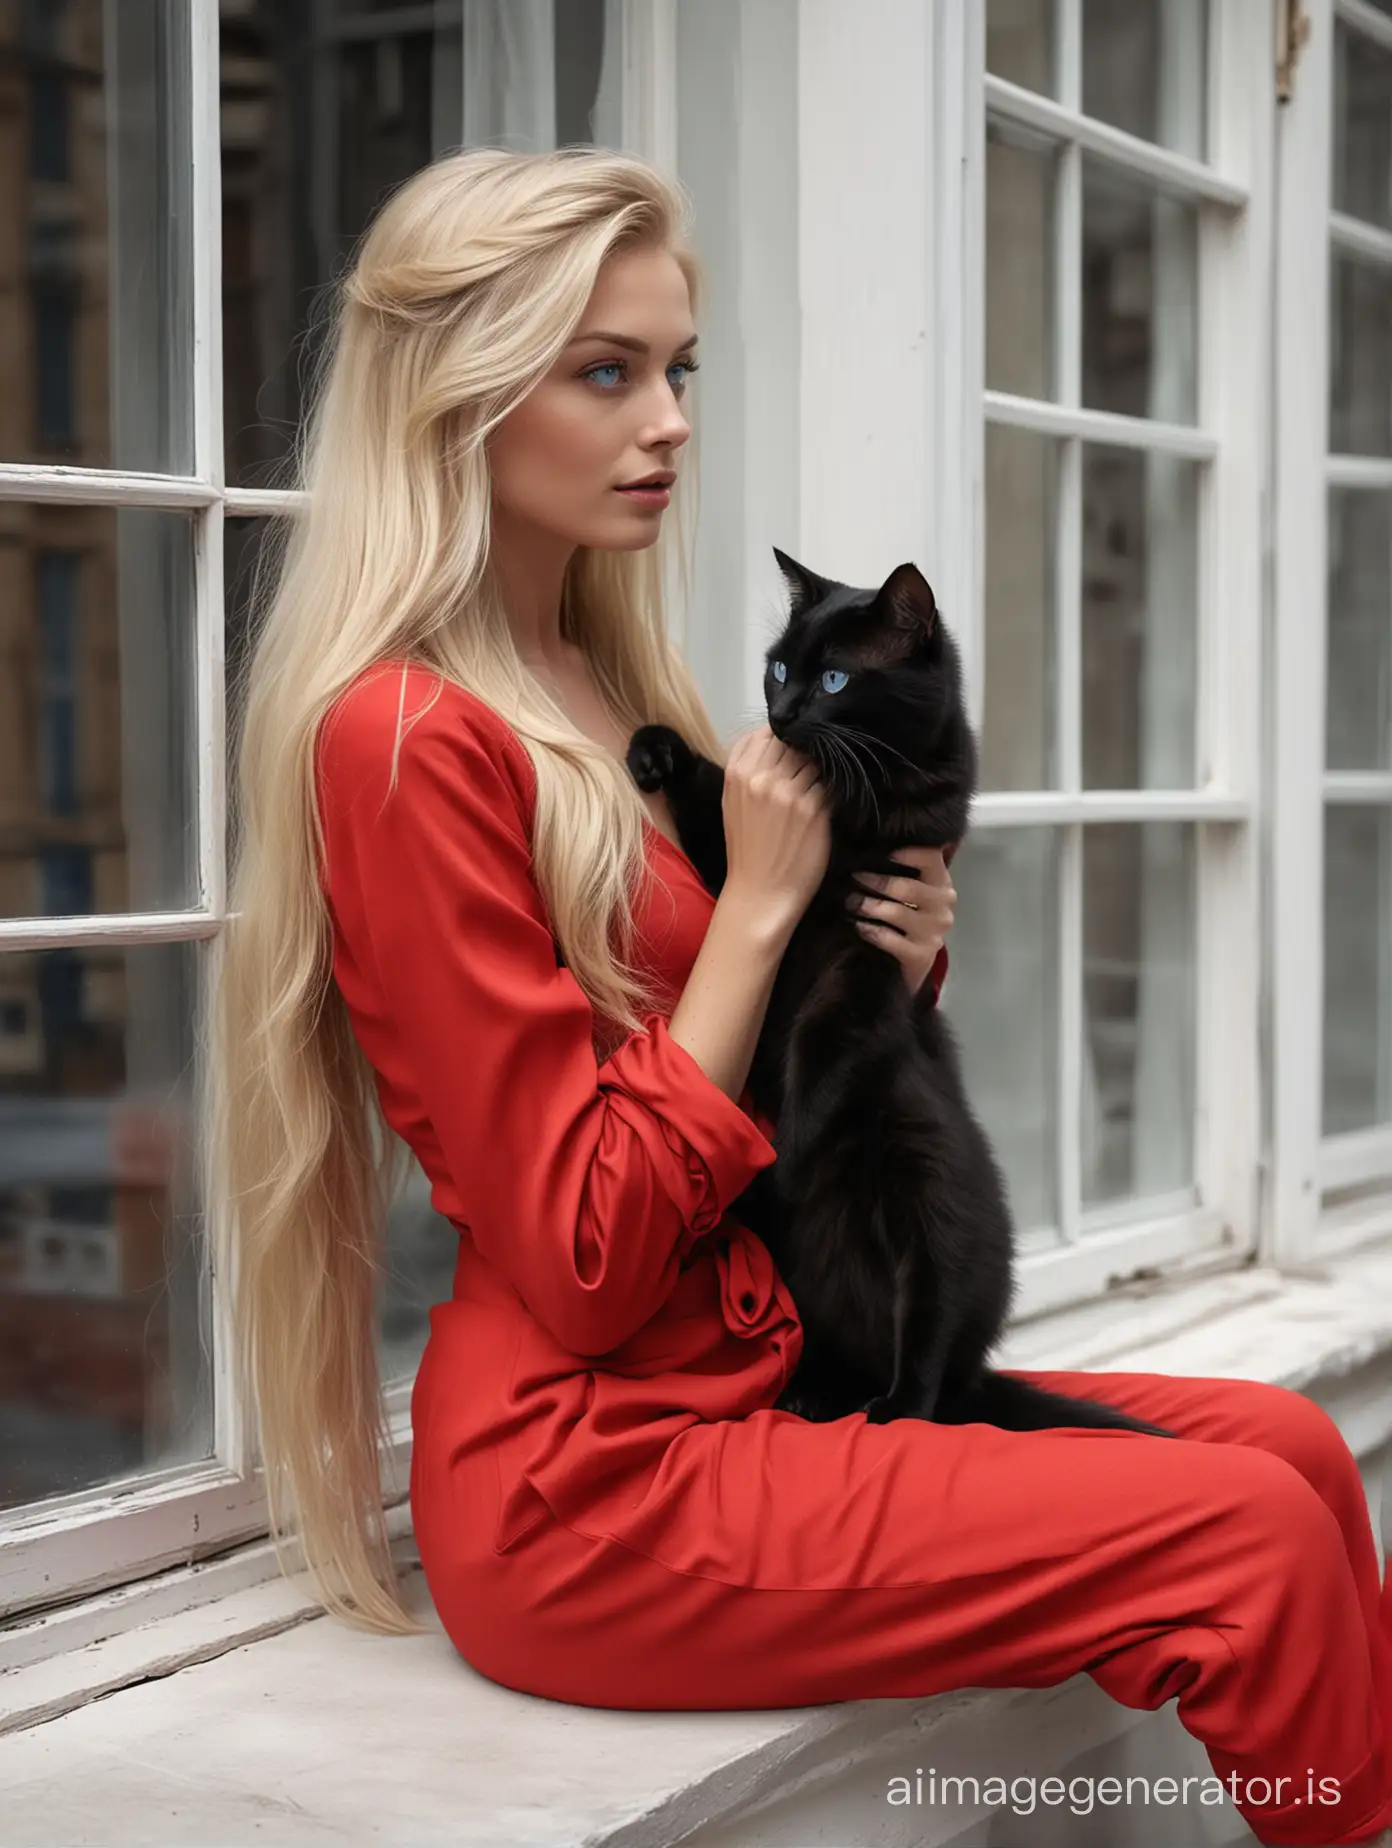 Blond-Fashion-Model-with-Black-Cat-Elegant-Woman-in-Red-Apparel-Poses-by-Window